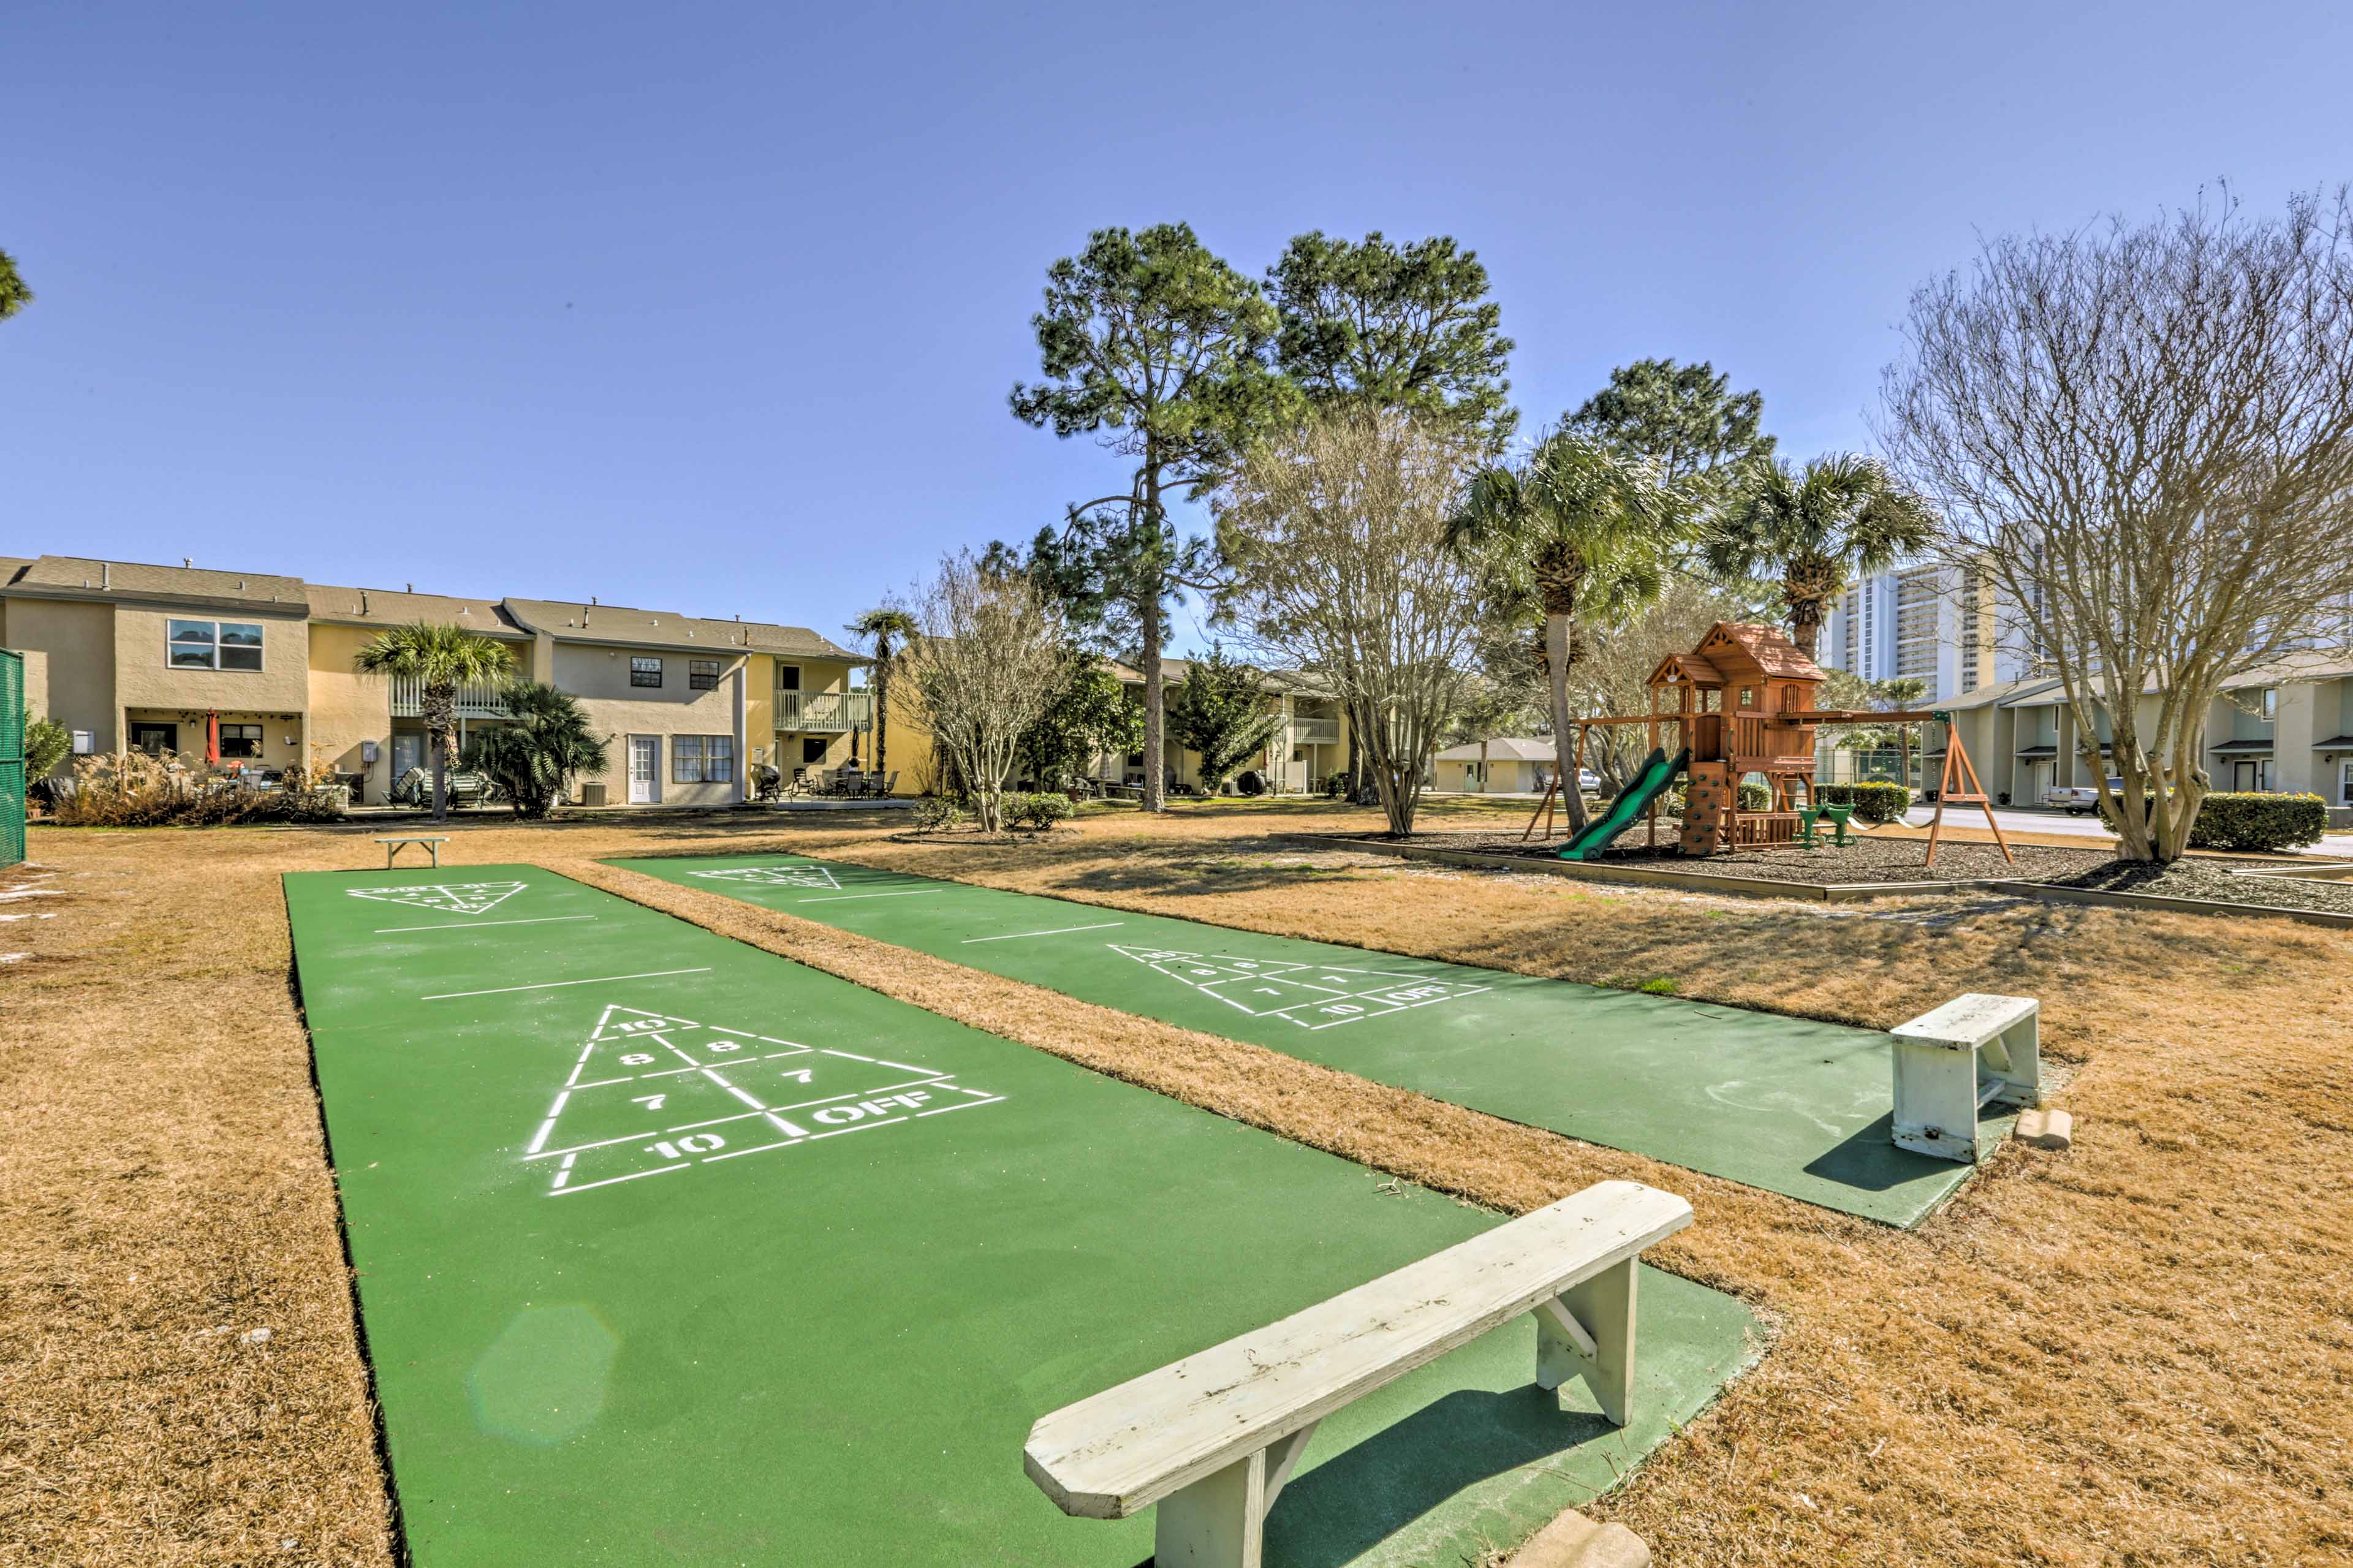 The little ones will love playing on the shuffleboard courts.